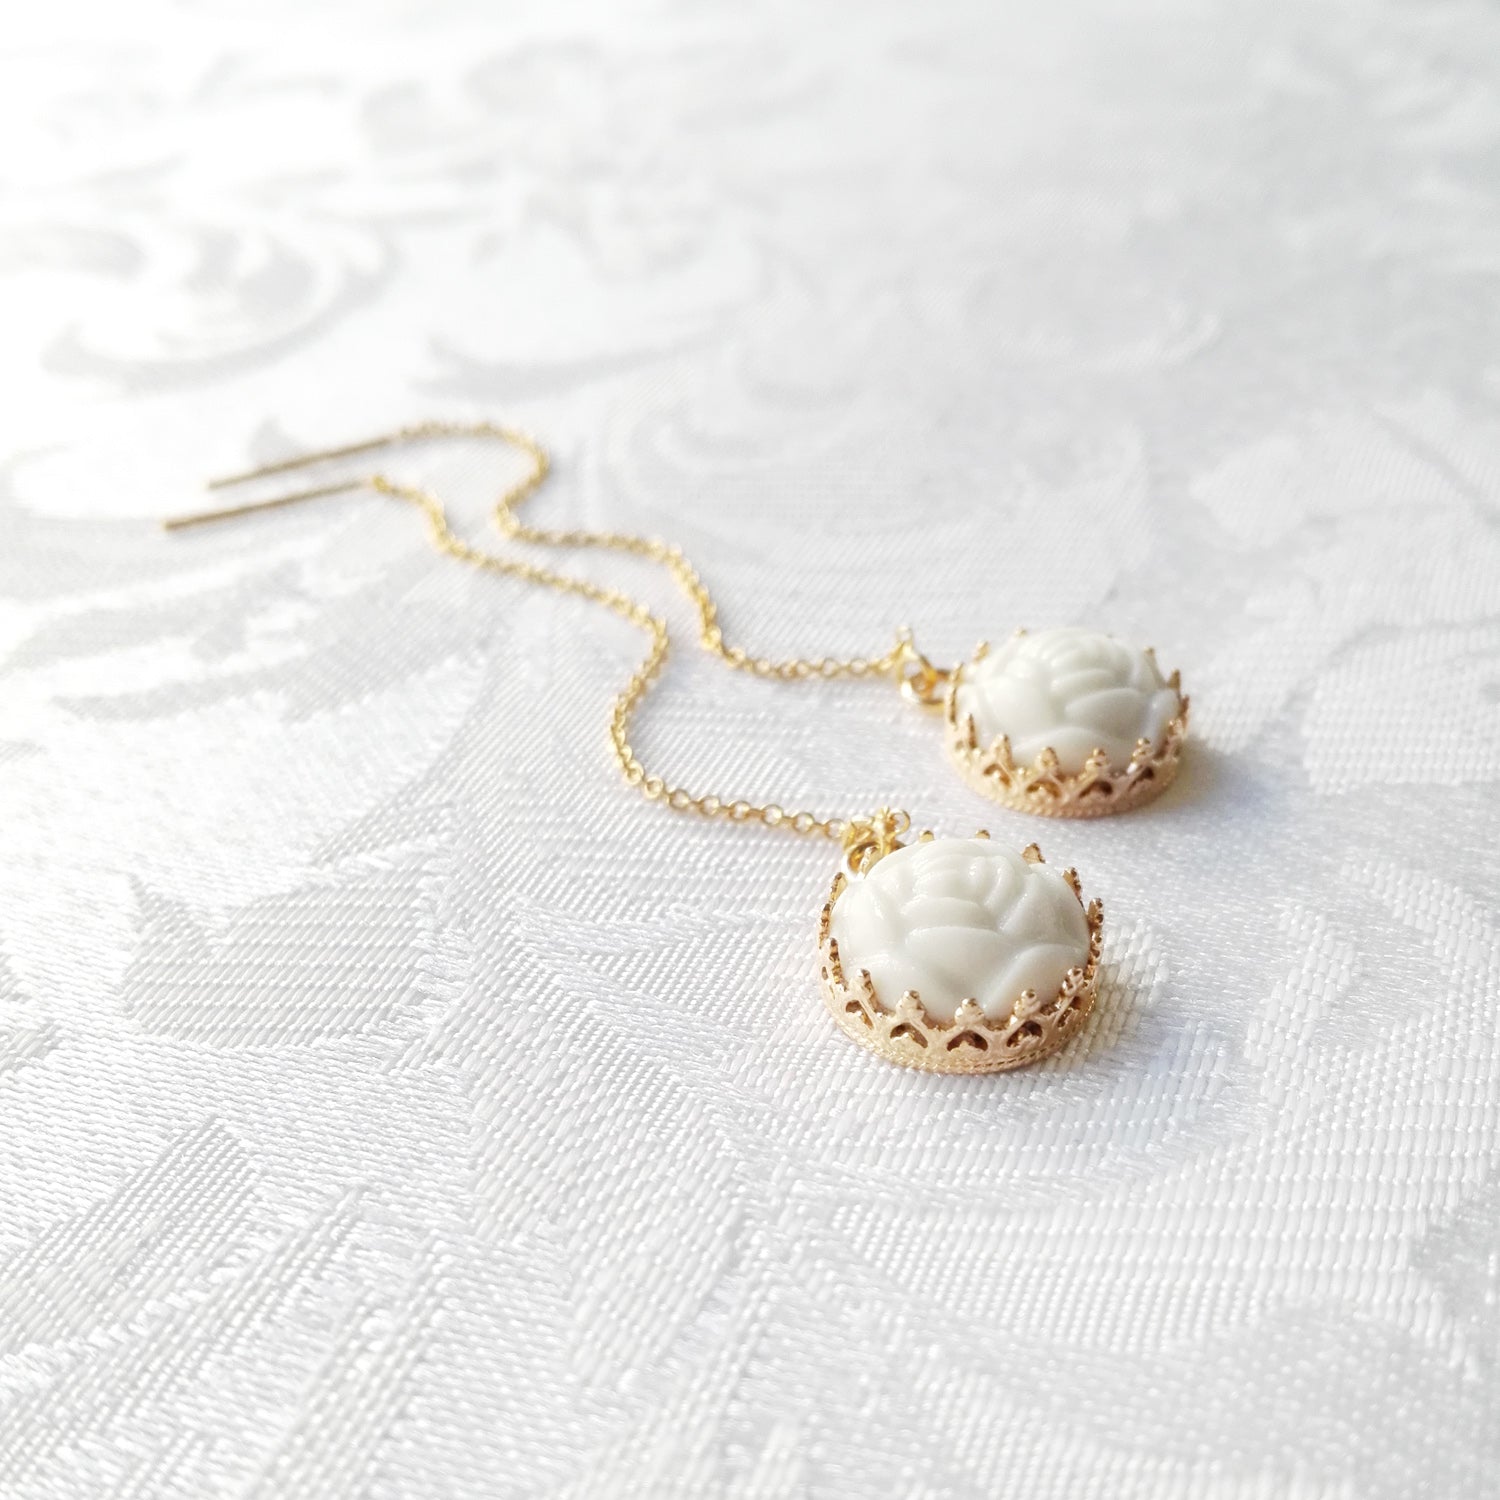 Mini Porcelain Rose With Gold-Filled Chain Earrings